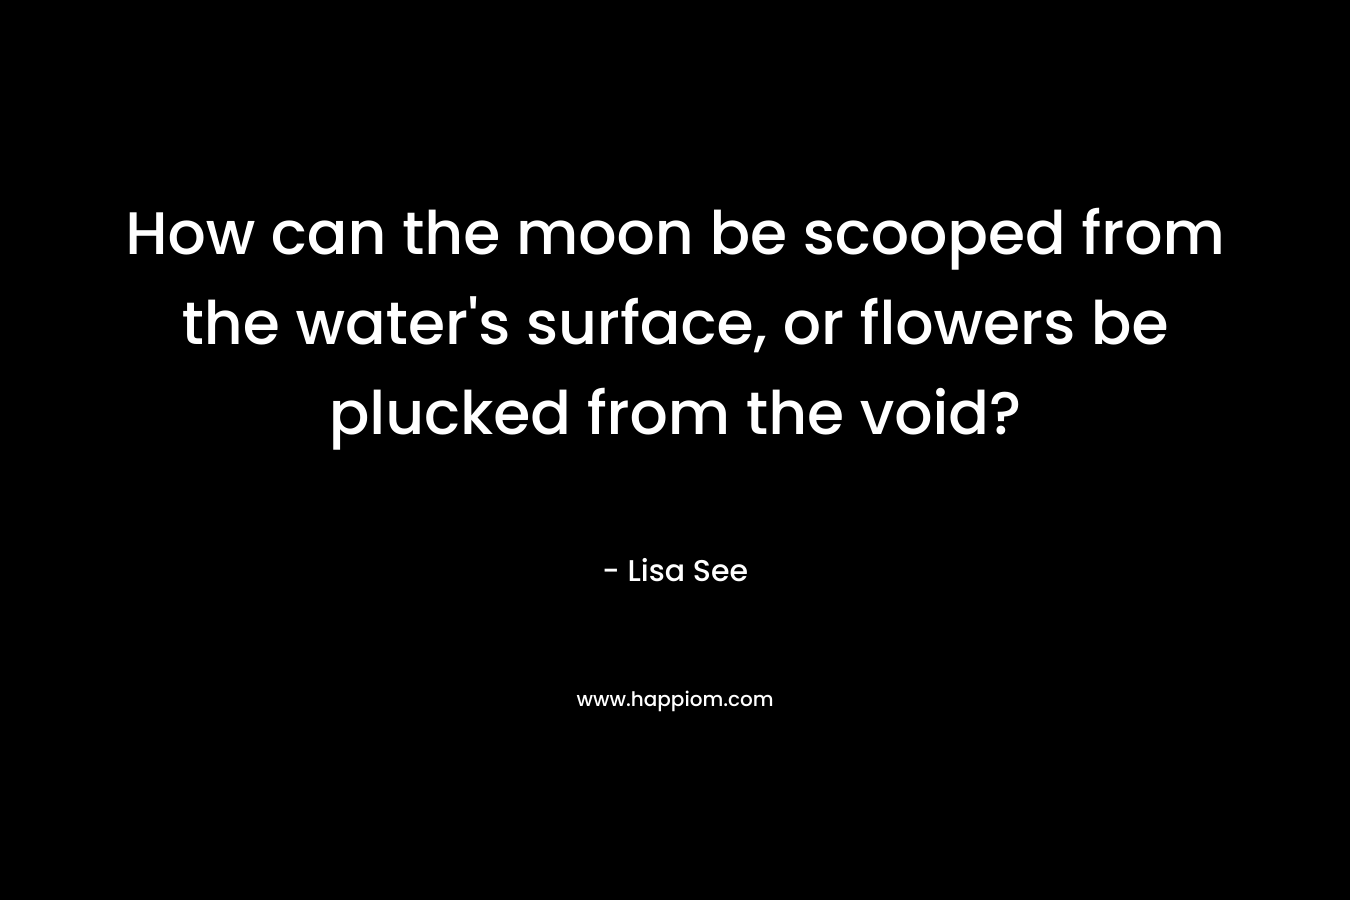 How can the moon be scooped from the water’s surface, or flowers be plucked from the void? – Lisa See